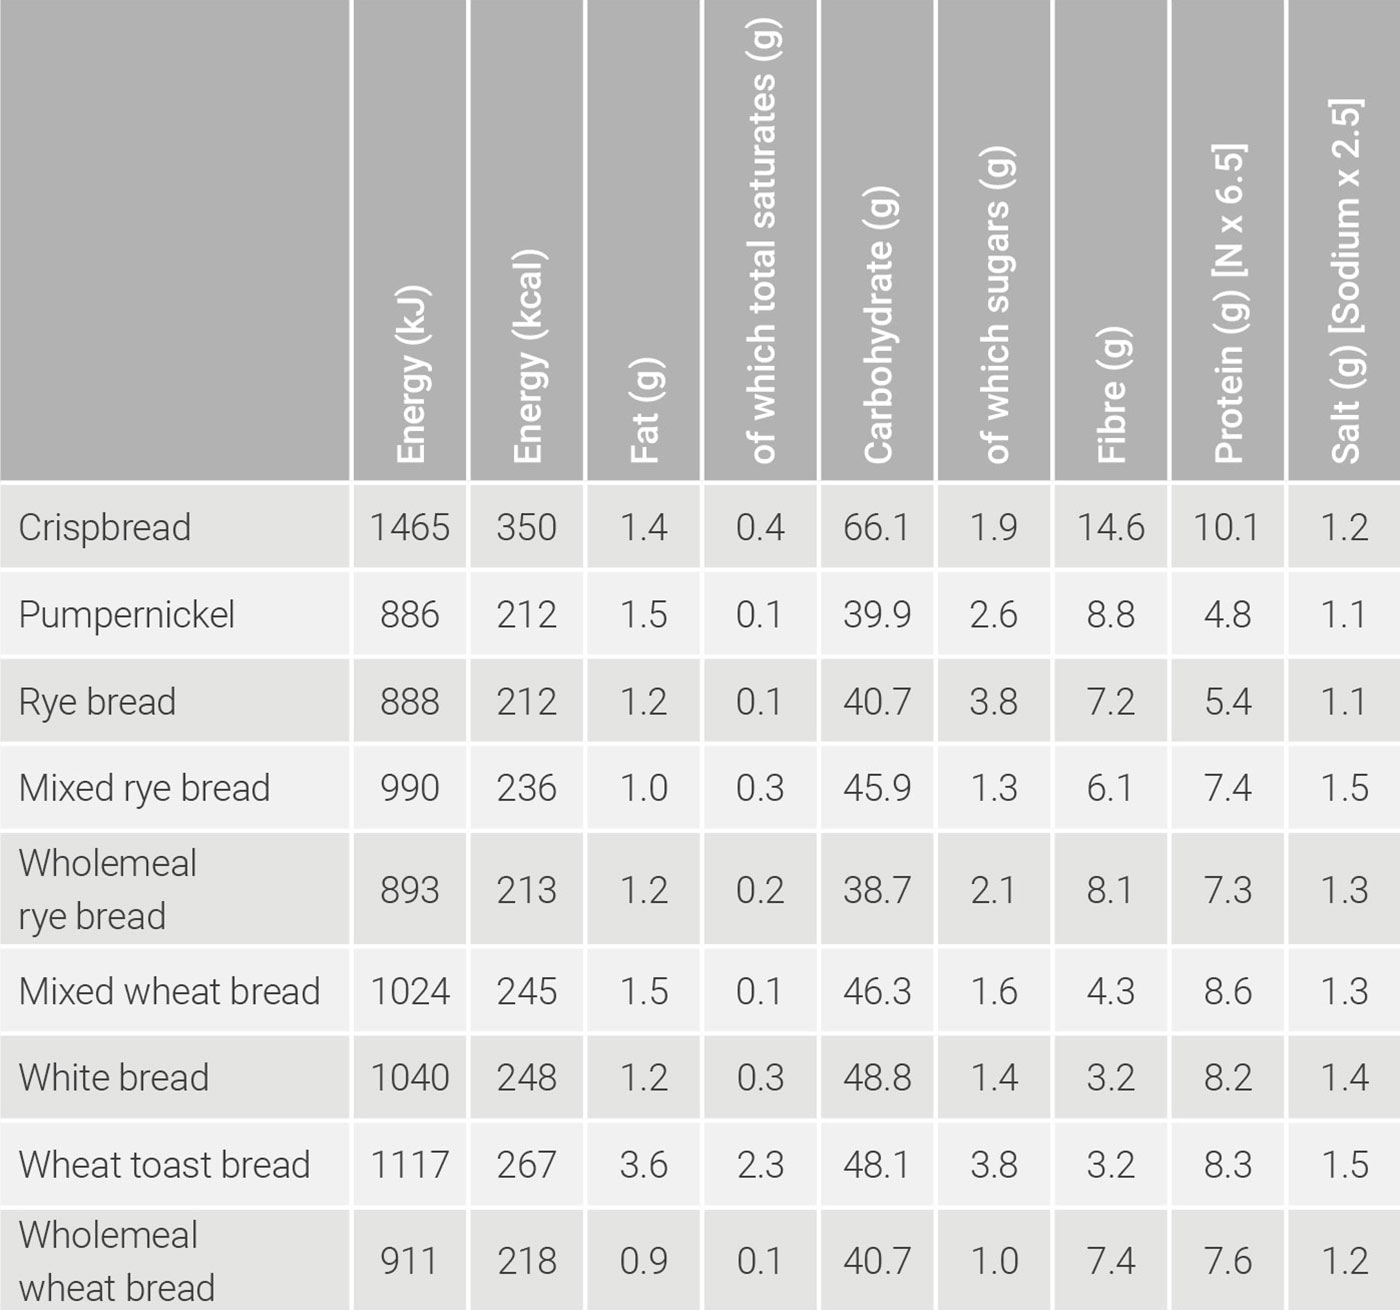 Nutritional information for standard breads